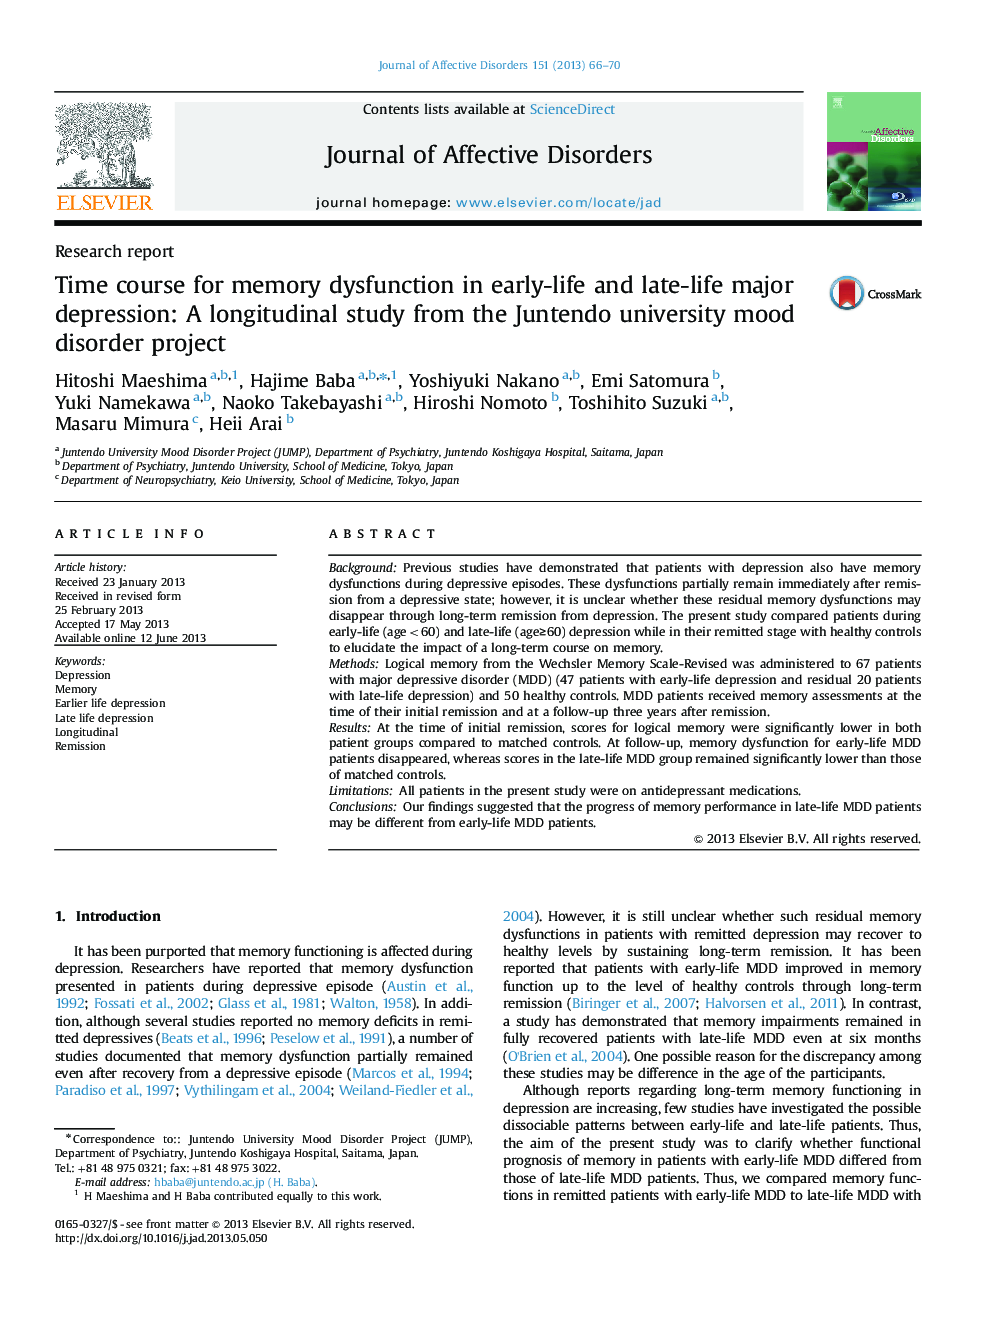 Time course for memory dysfunction in early-life and late-life major depression: A longitudinal study from the Juntendo university mood disorder project